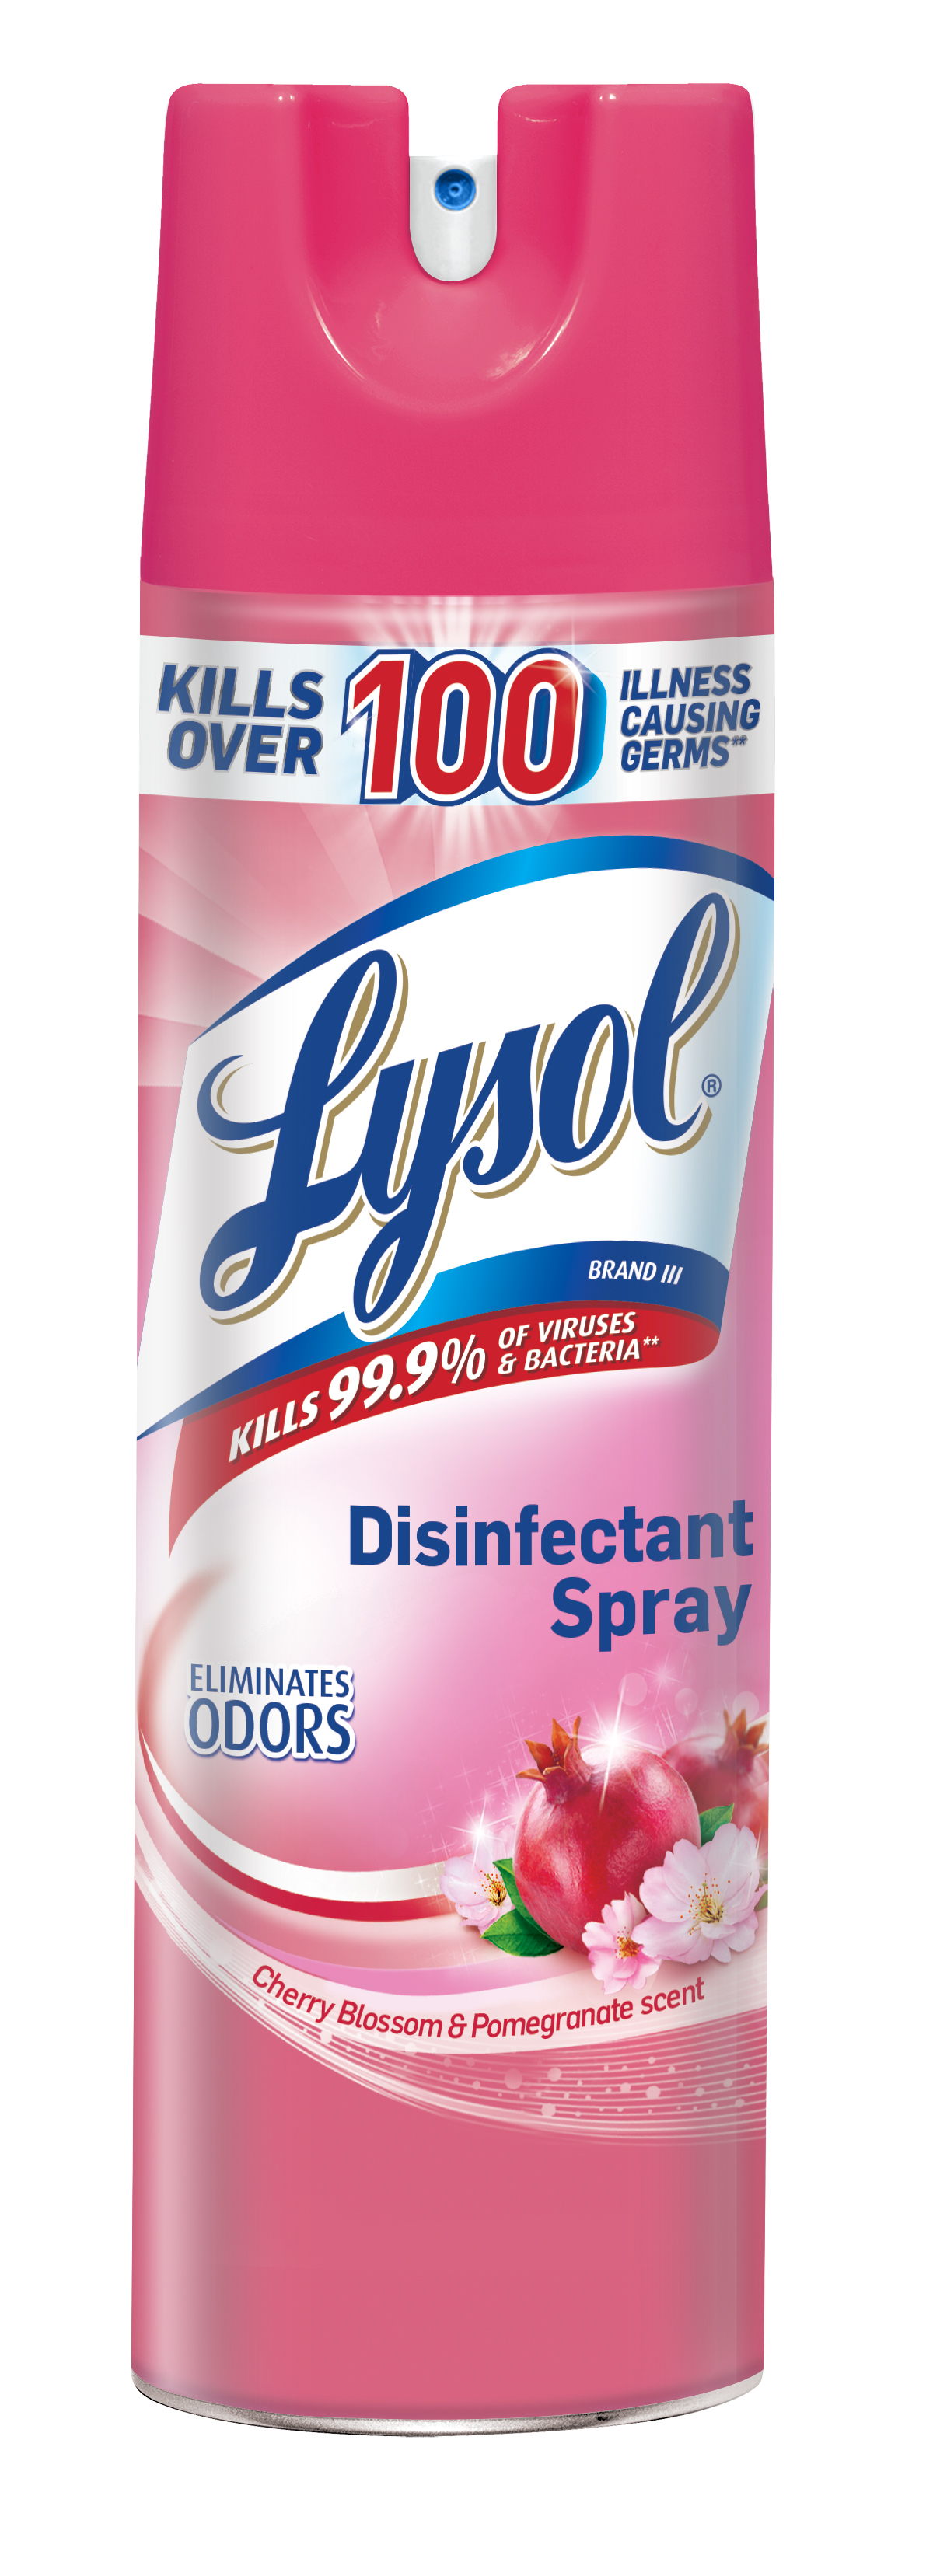 LYSOL® Disinfectant Spray - Cherry Blossoms & Pomegranate